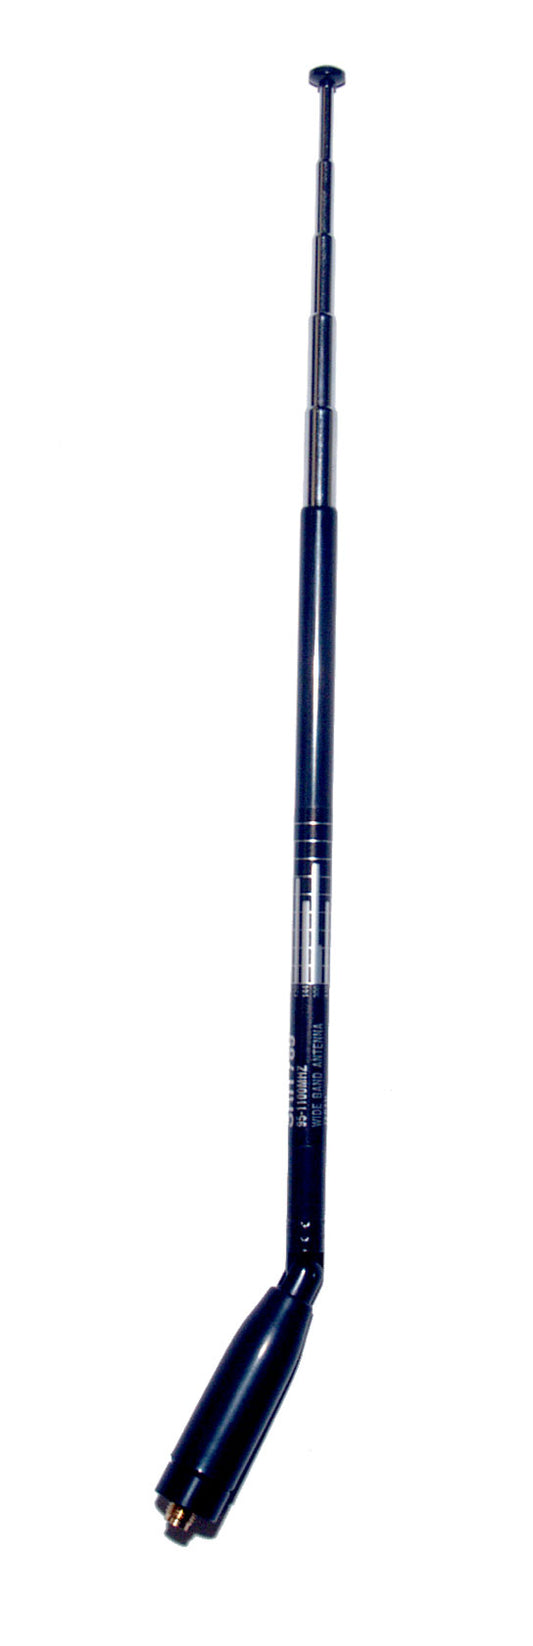 Handheld multi-band (95-1100 MHz) telescopic/foldable antenna with SMA female connector